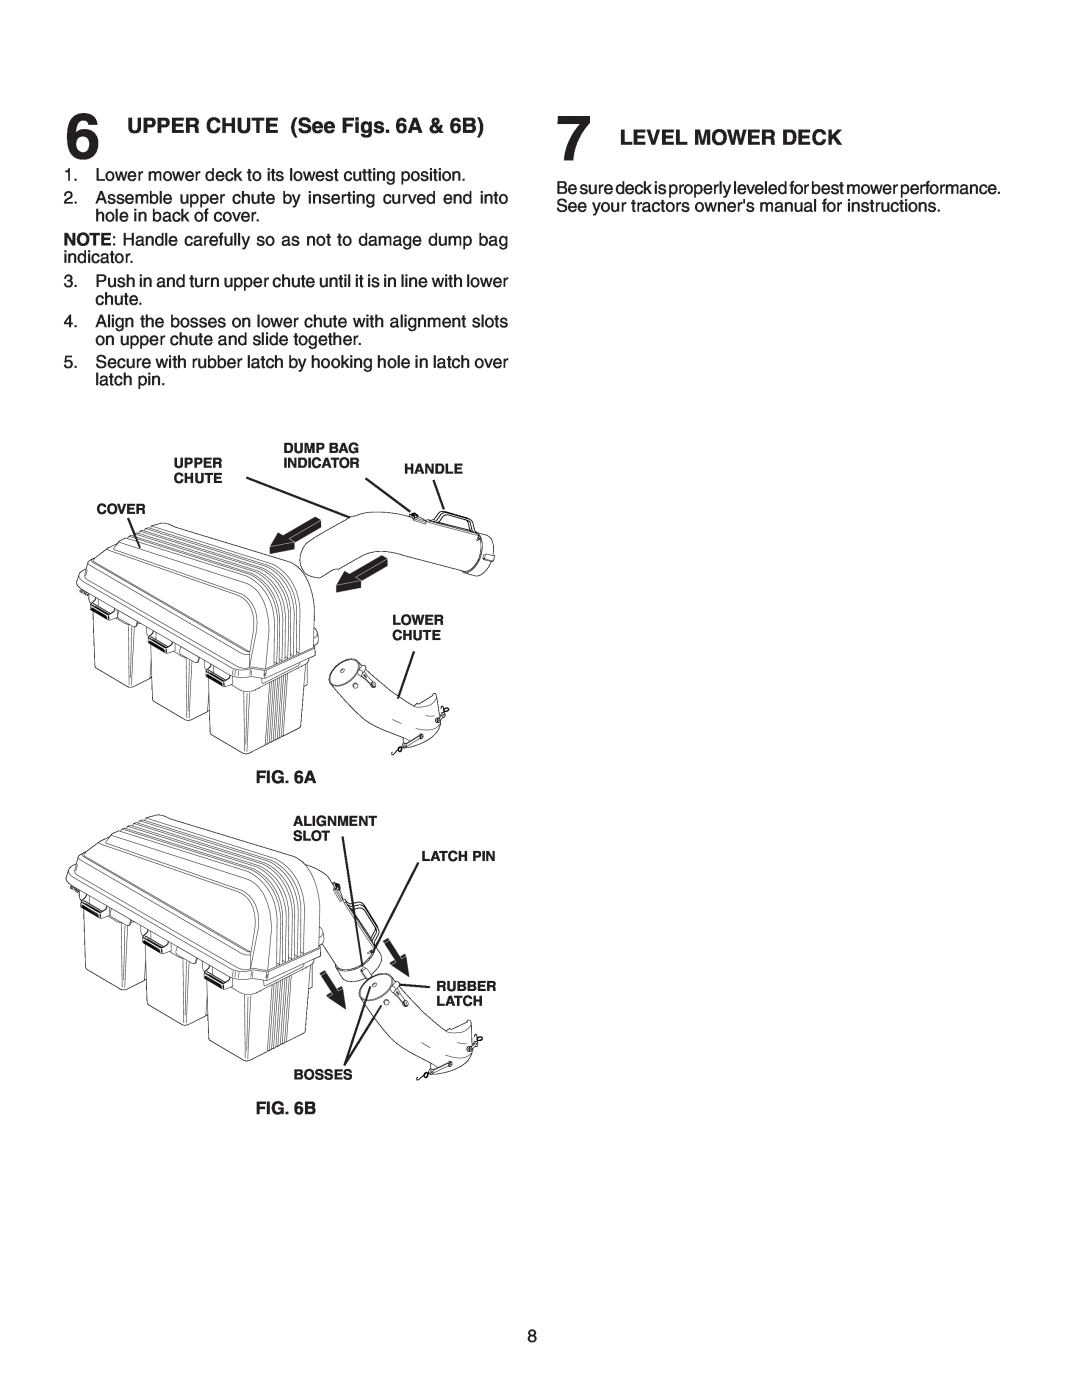 Poulan 532178476, QC342A, 954 63 19-23 owner manual UPPER CHUTE See Figs. 6A & 6B, Level Mower Deck 